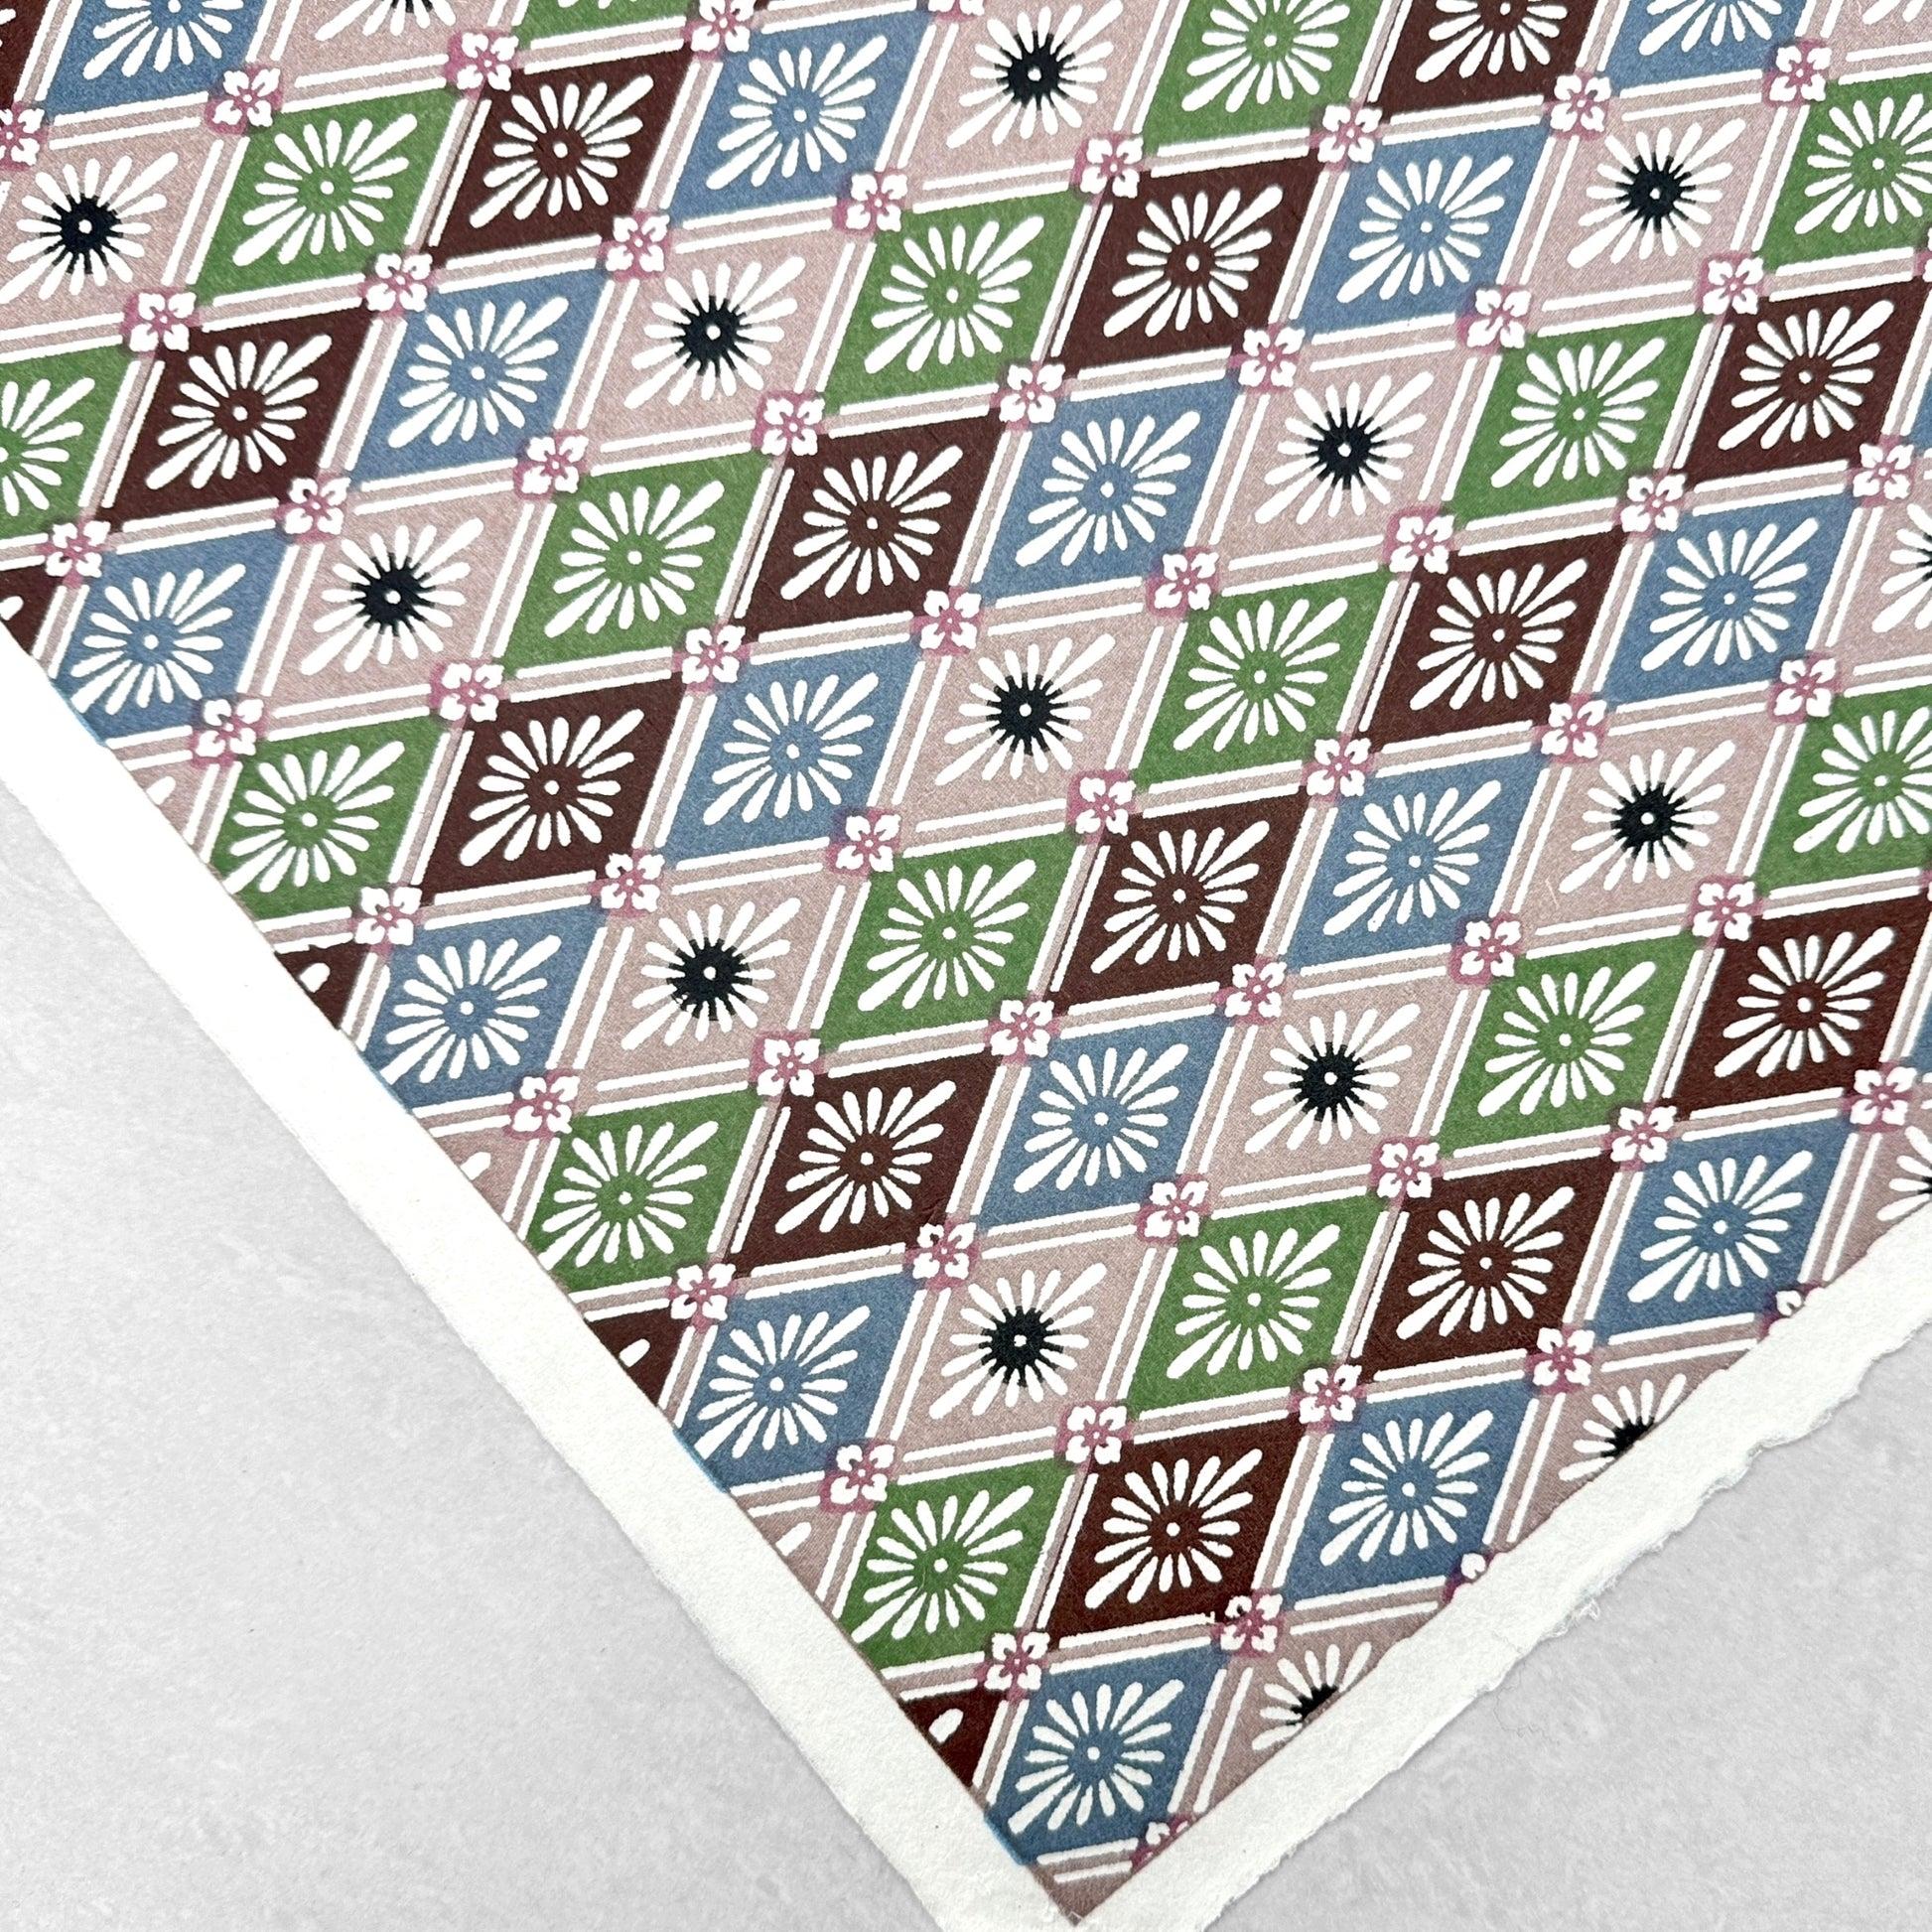 A Japanese stencil-dyed patterned paper with a repeat diamond floral pattern in blue, taupe, green and brown. Flat view